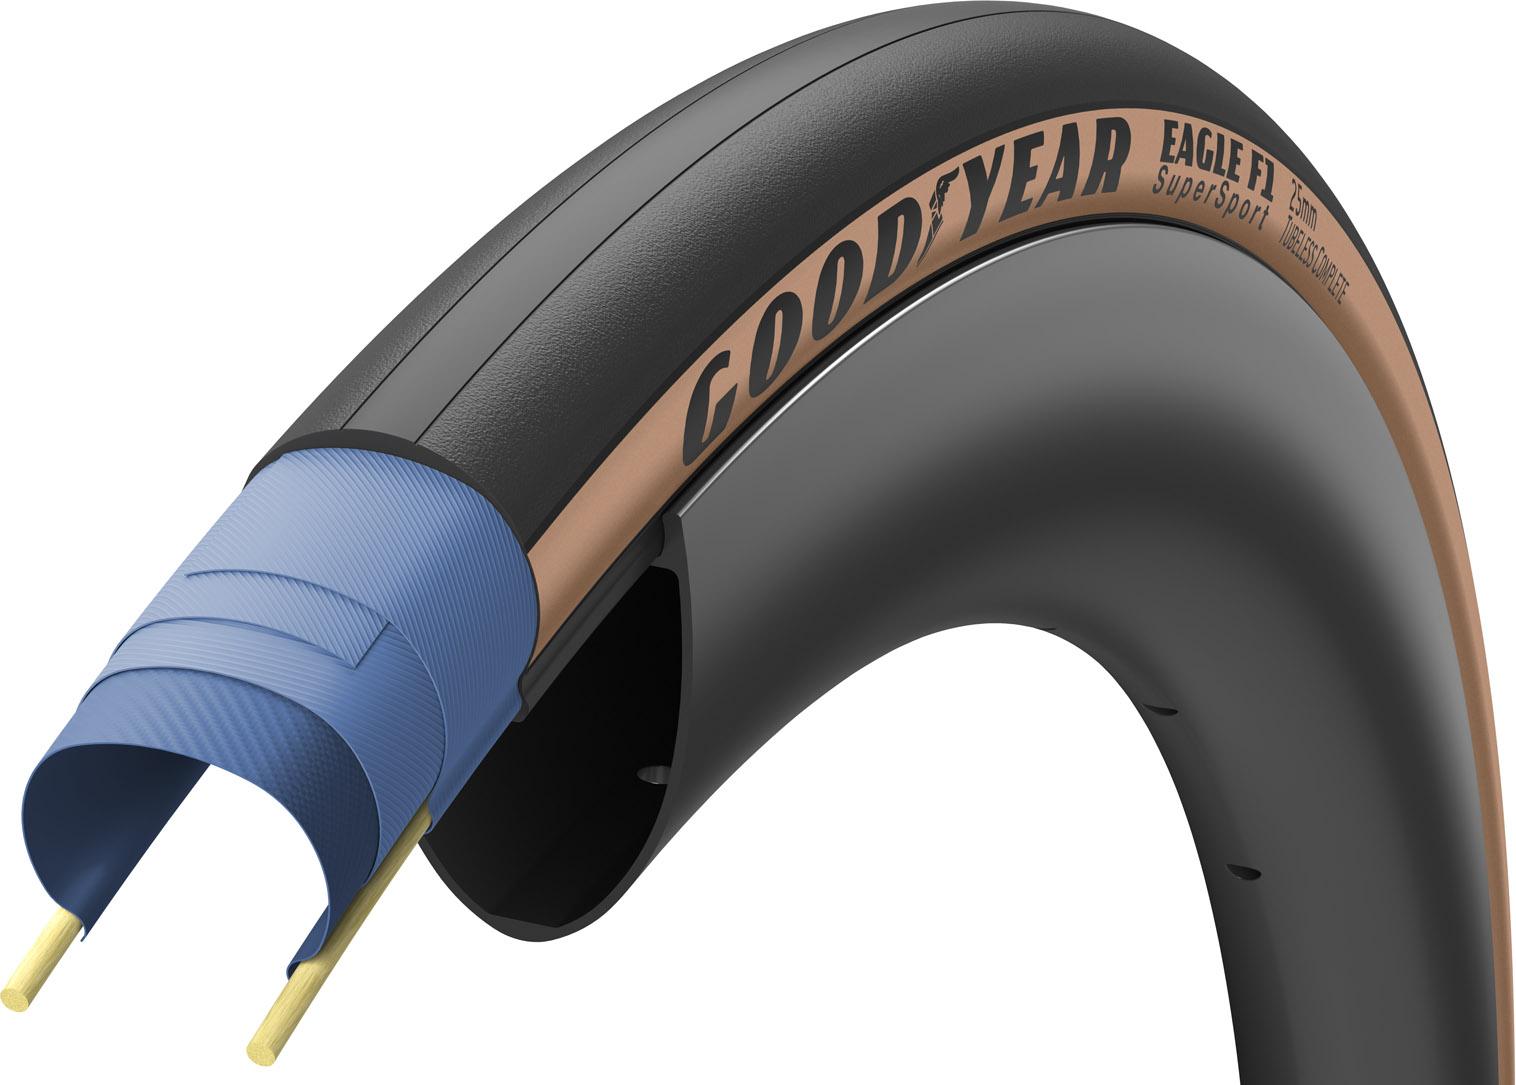 Goodyear Eagle F1 Supersport Tubeless Road Tyre - Black/tan Wall